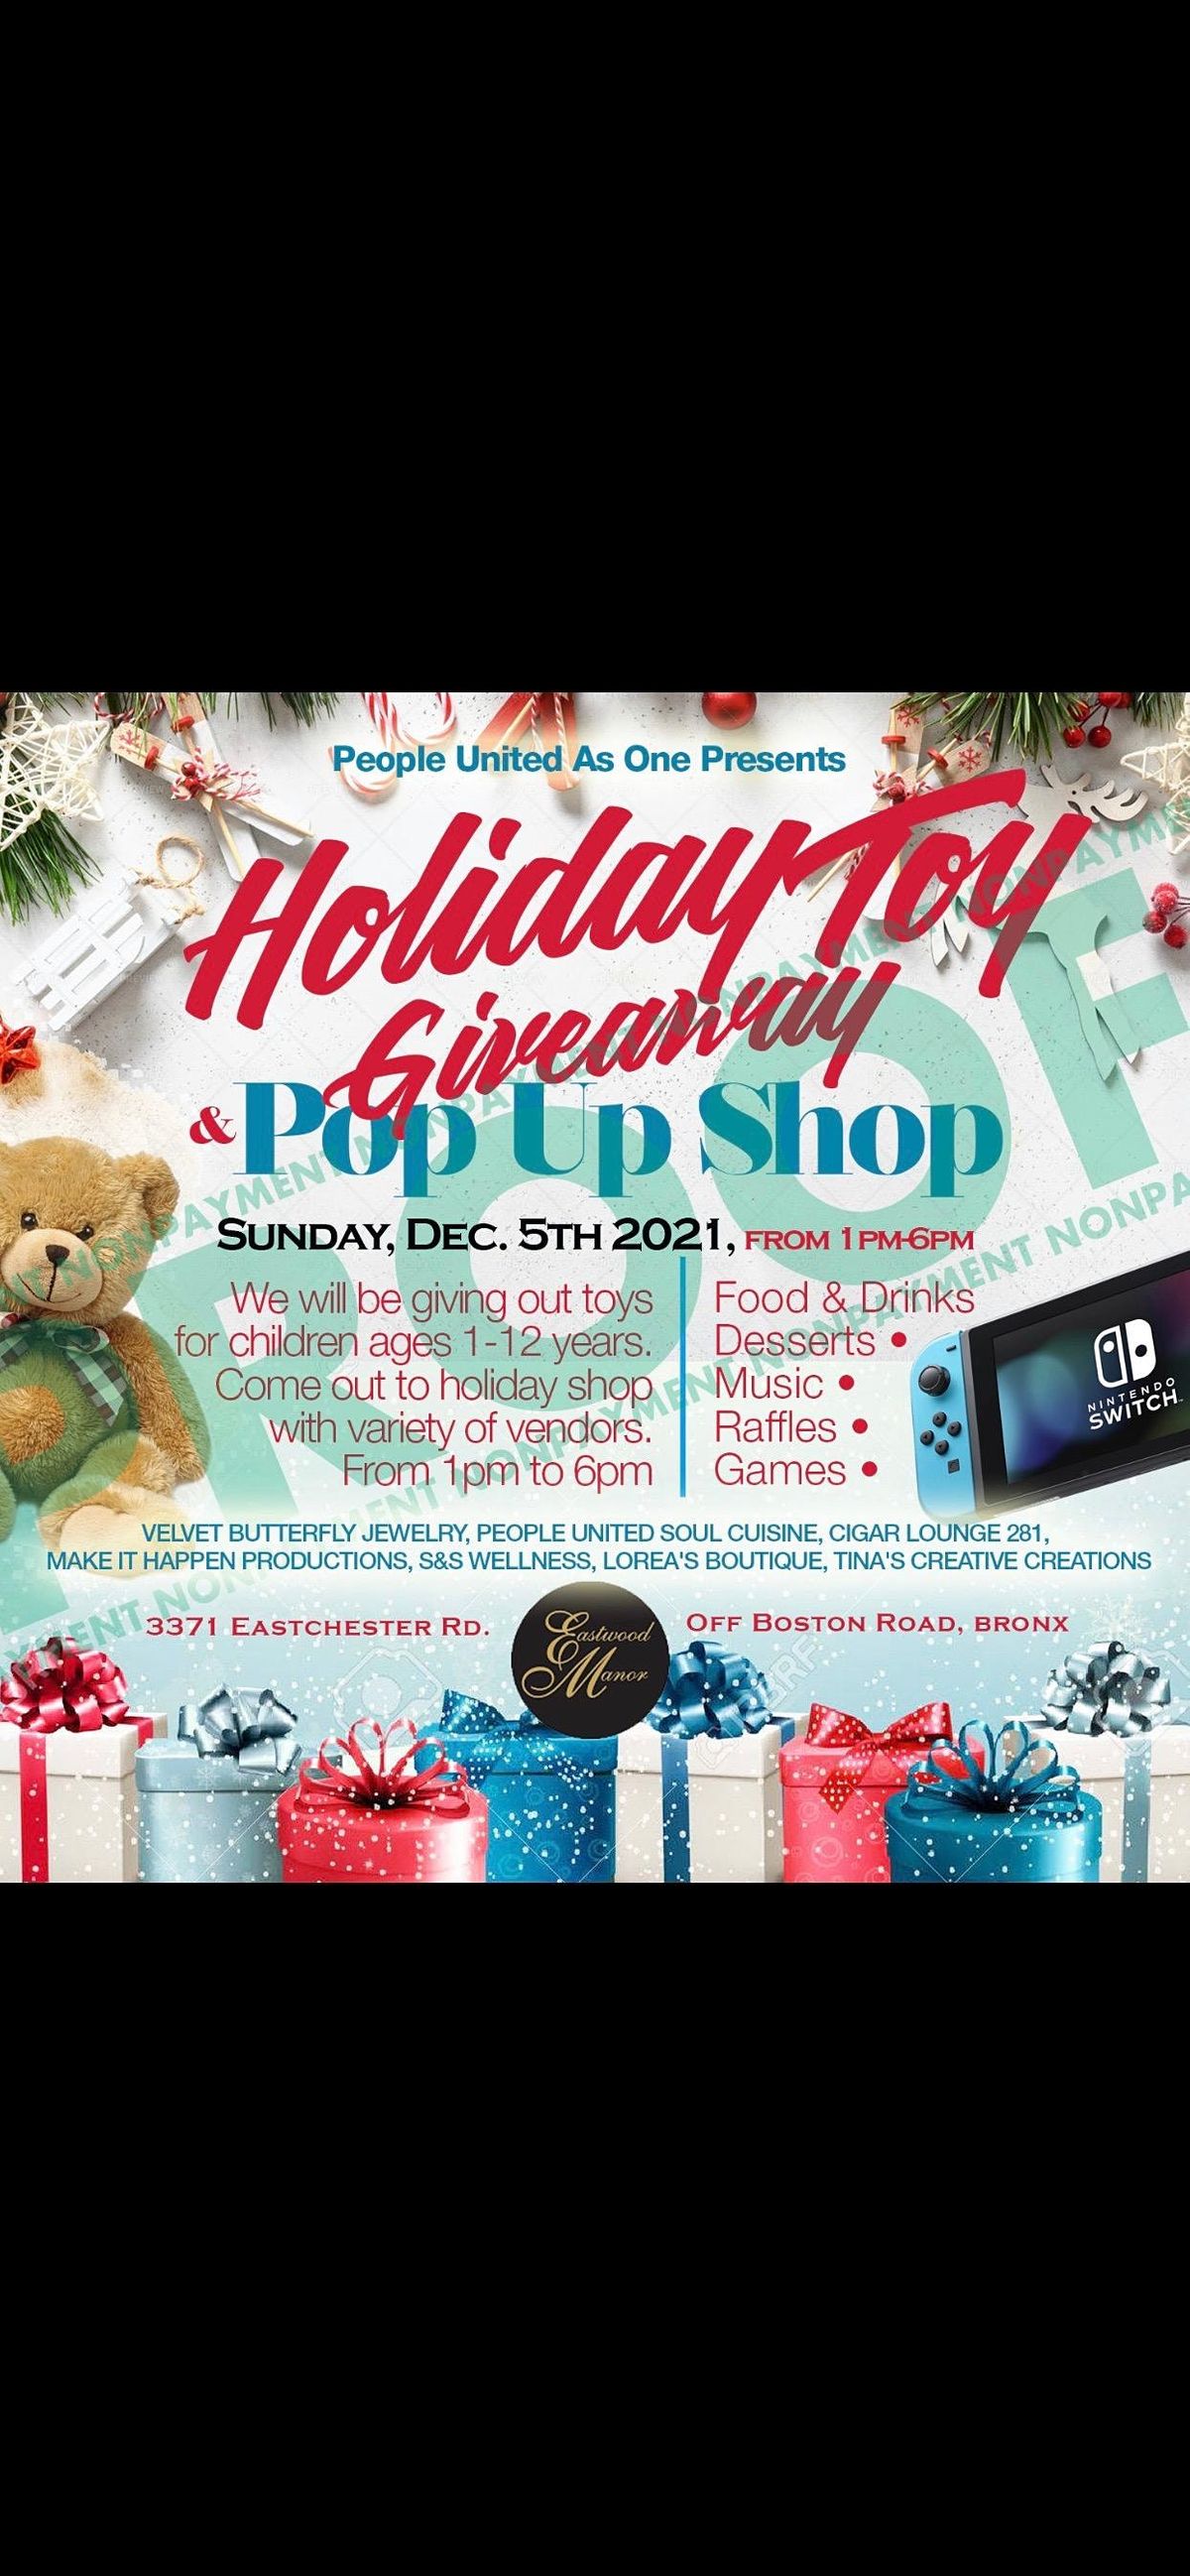 People United As one presents a Holiday Toy giveaway\/pop up shop Dec. 5th